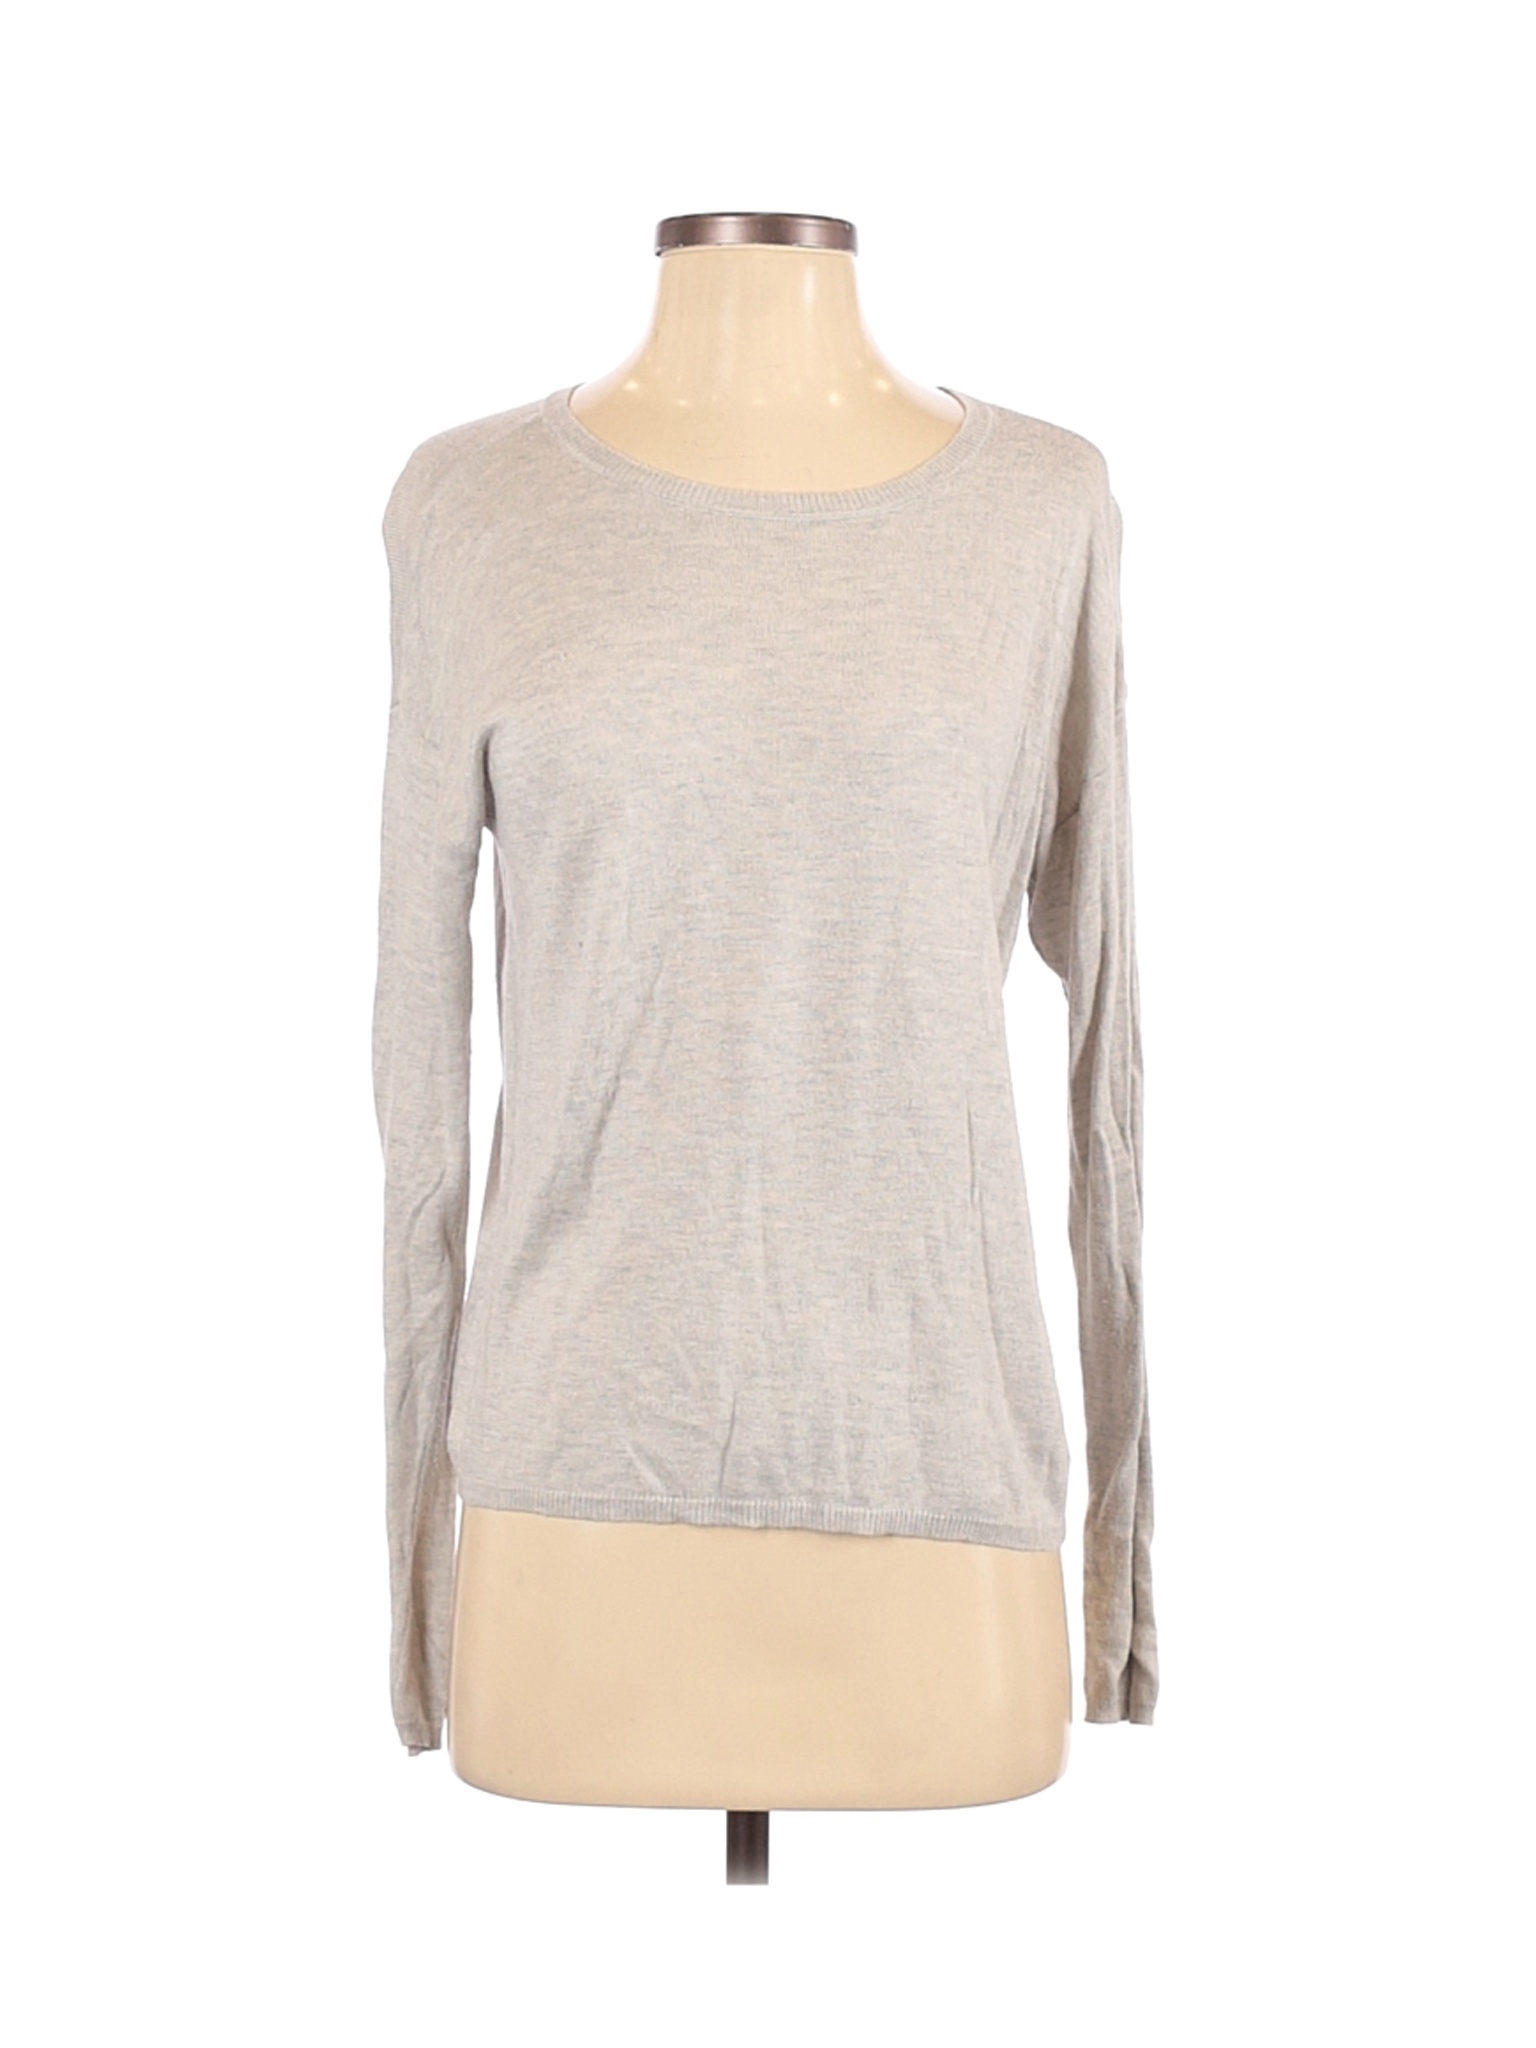 Forever 21 Contemporary Women Gray Pullover Sweater S | eBay